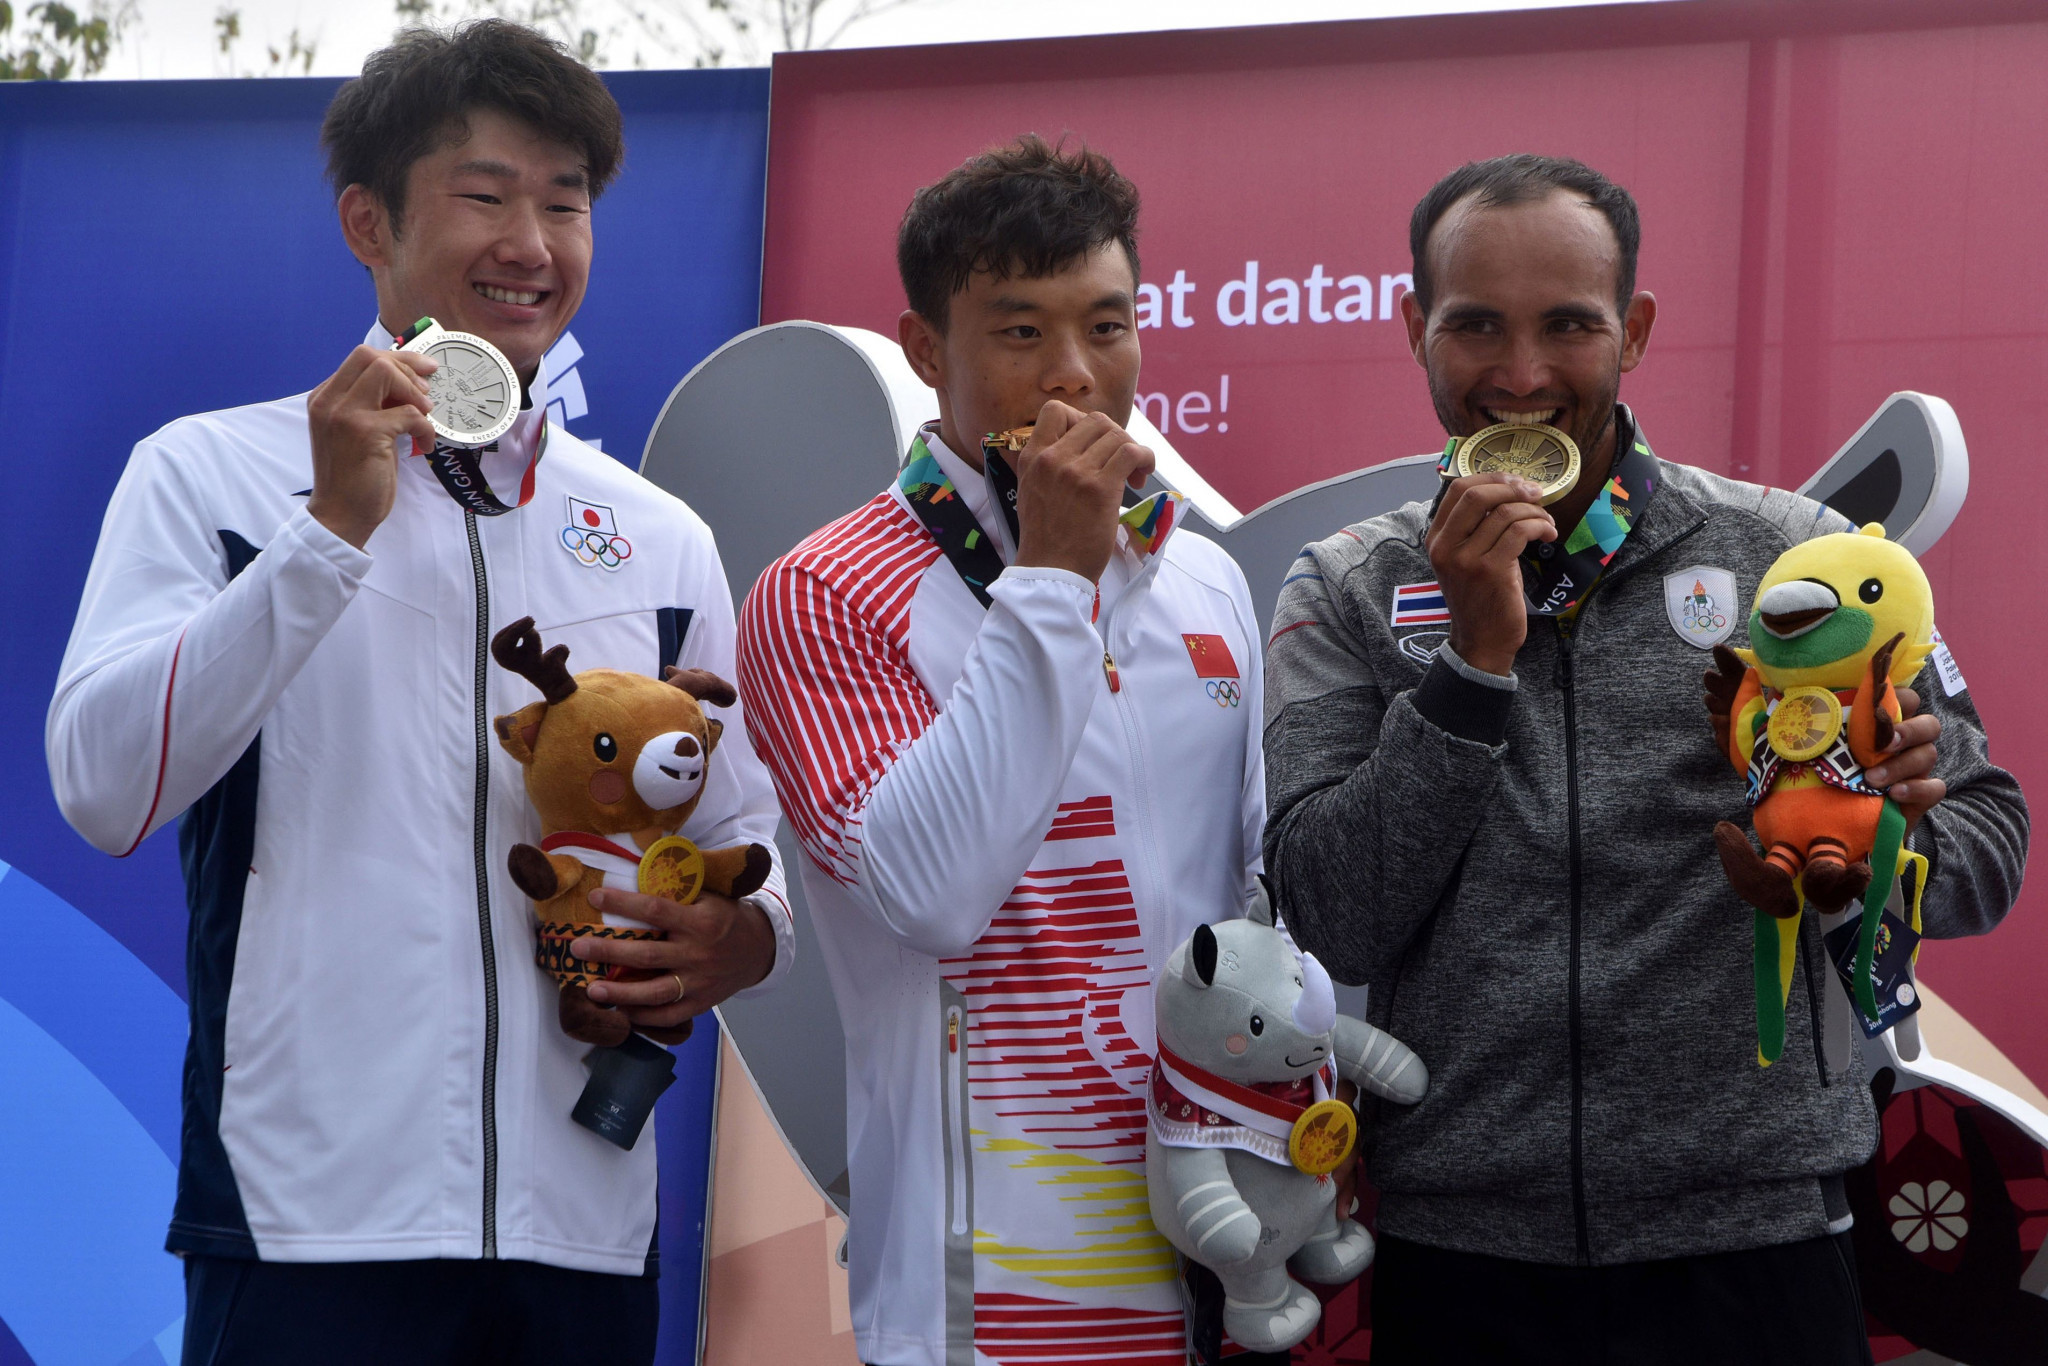 China won both golds on offer today in the canoe/kayak slalom. Xin Quan won the men's single kayak event ©Getty Images